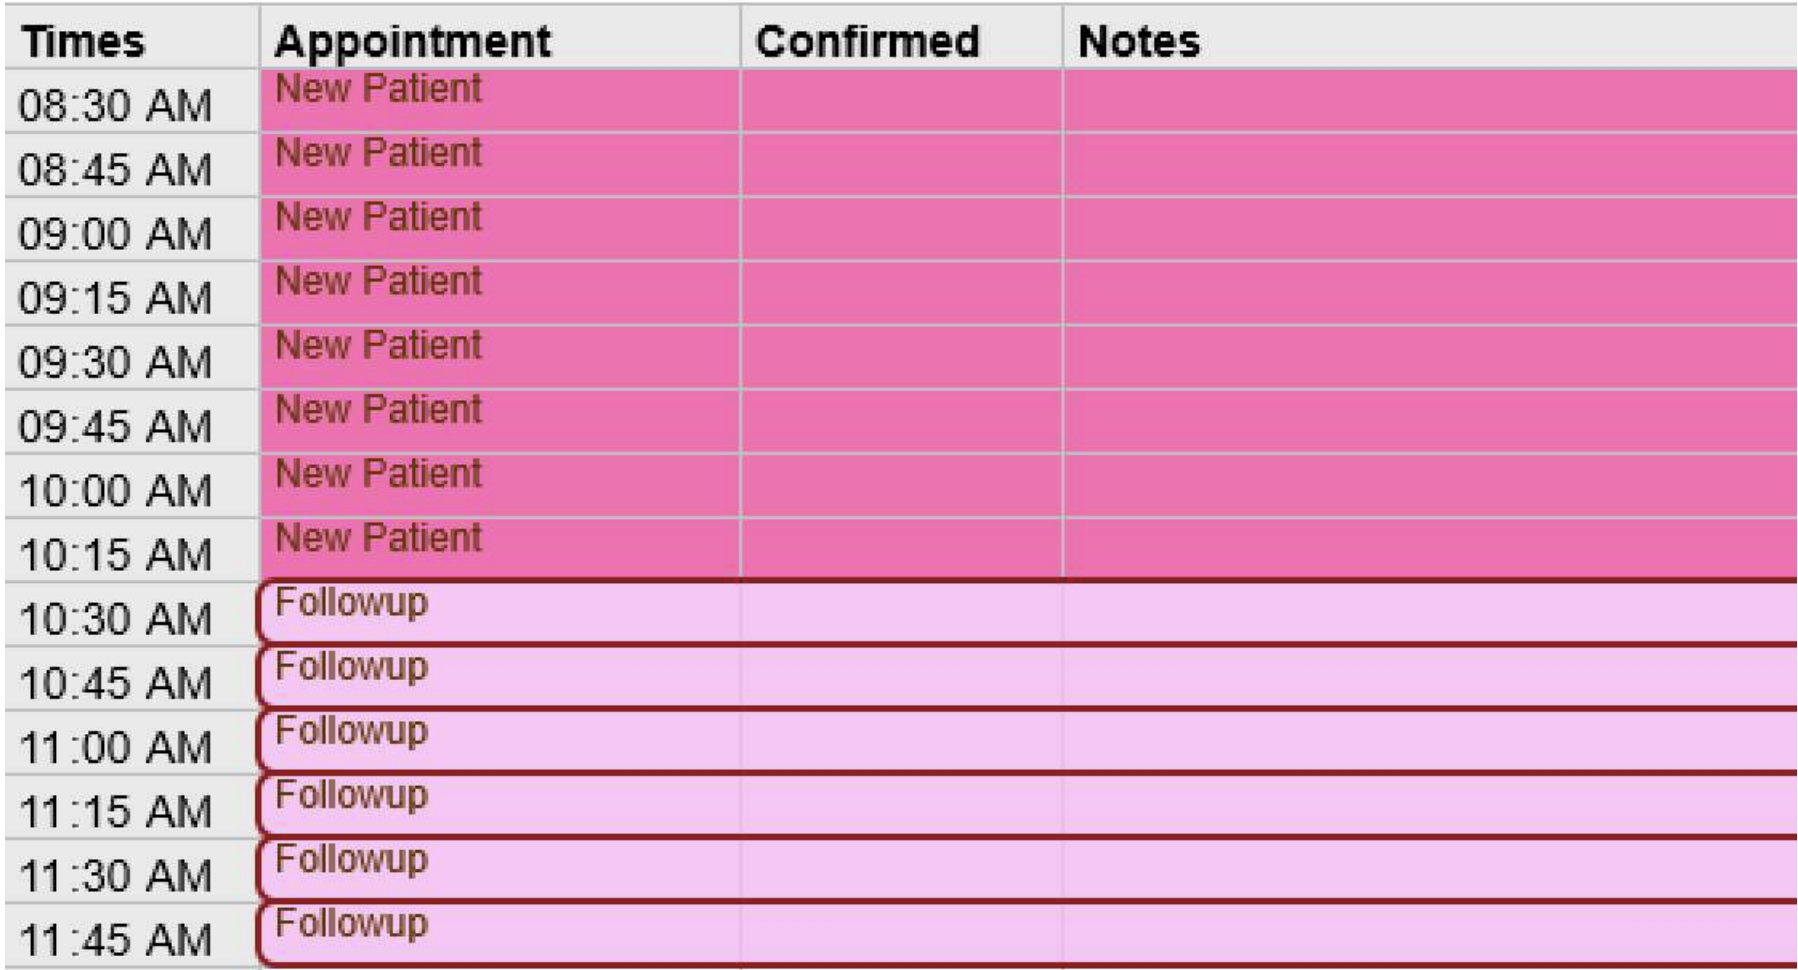 Genie Appointment Schedules.png